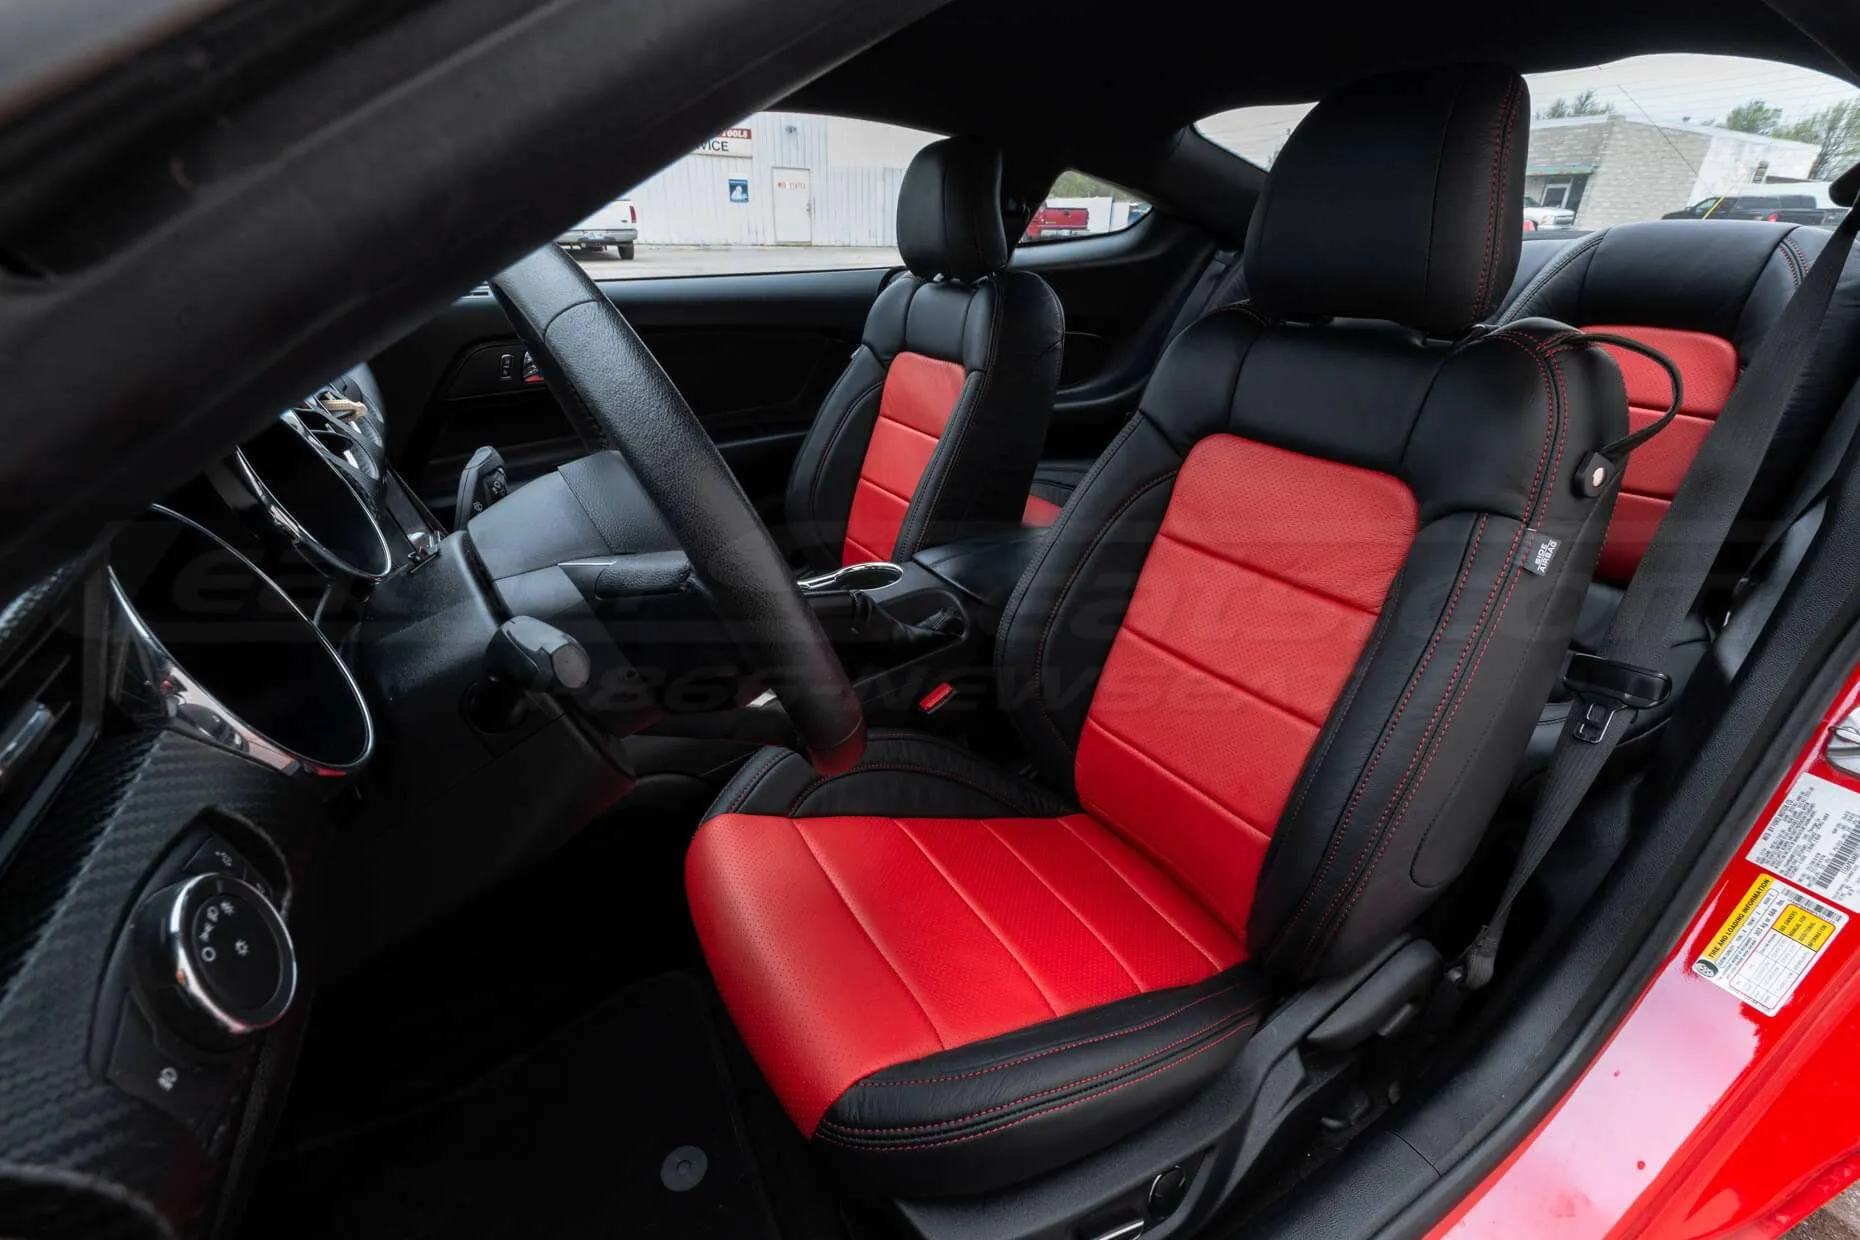 Ford Mustang installed leather kit - Black & Bright Red - Front drivers seat